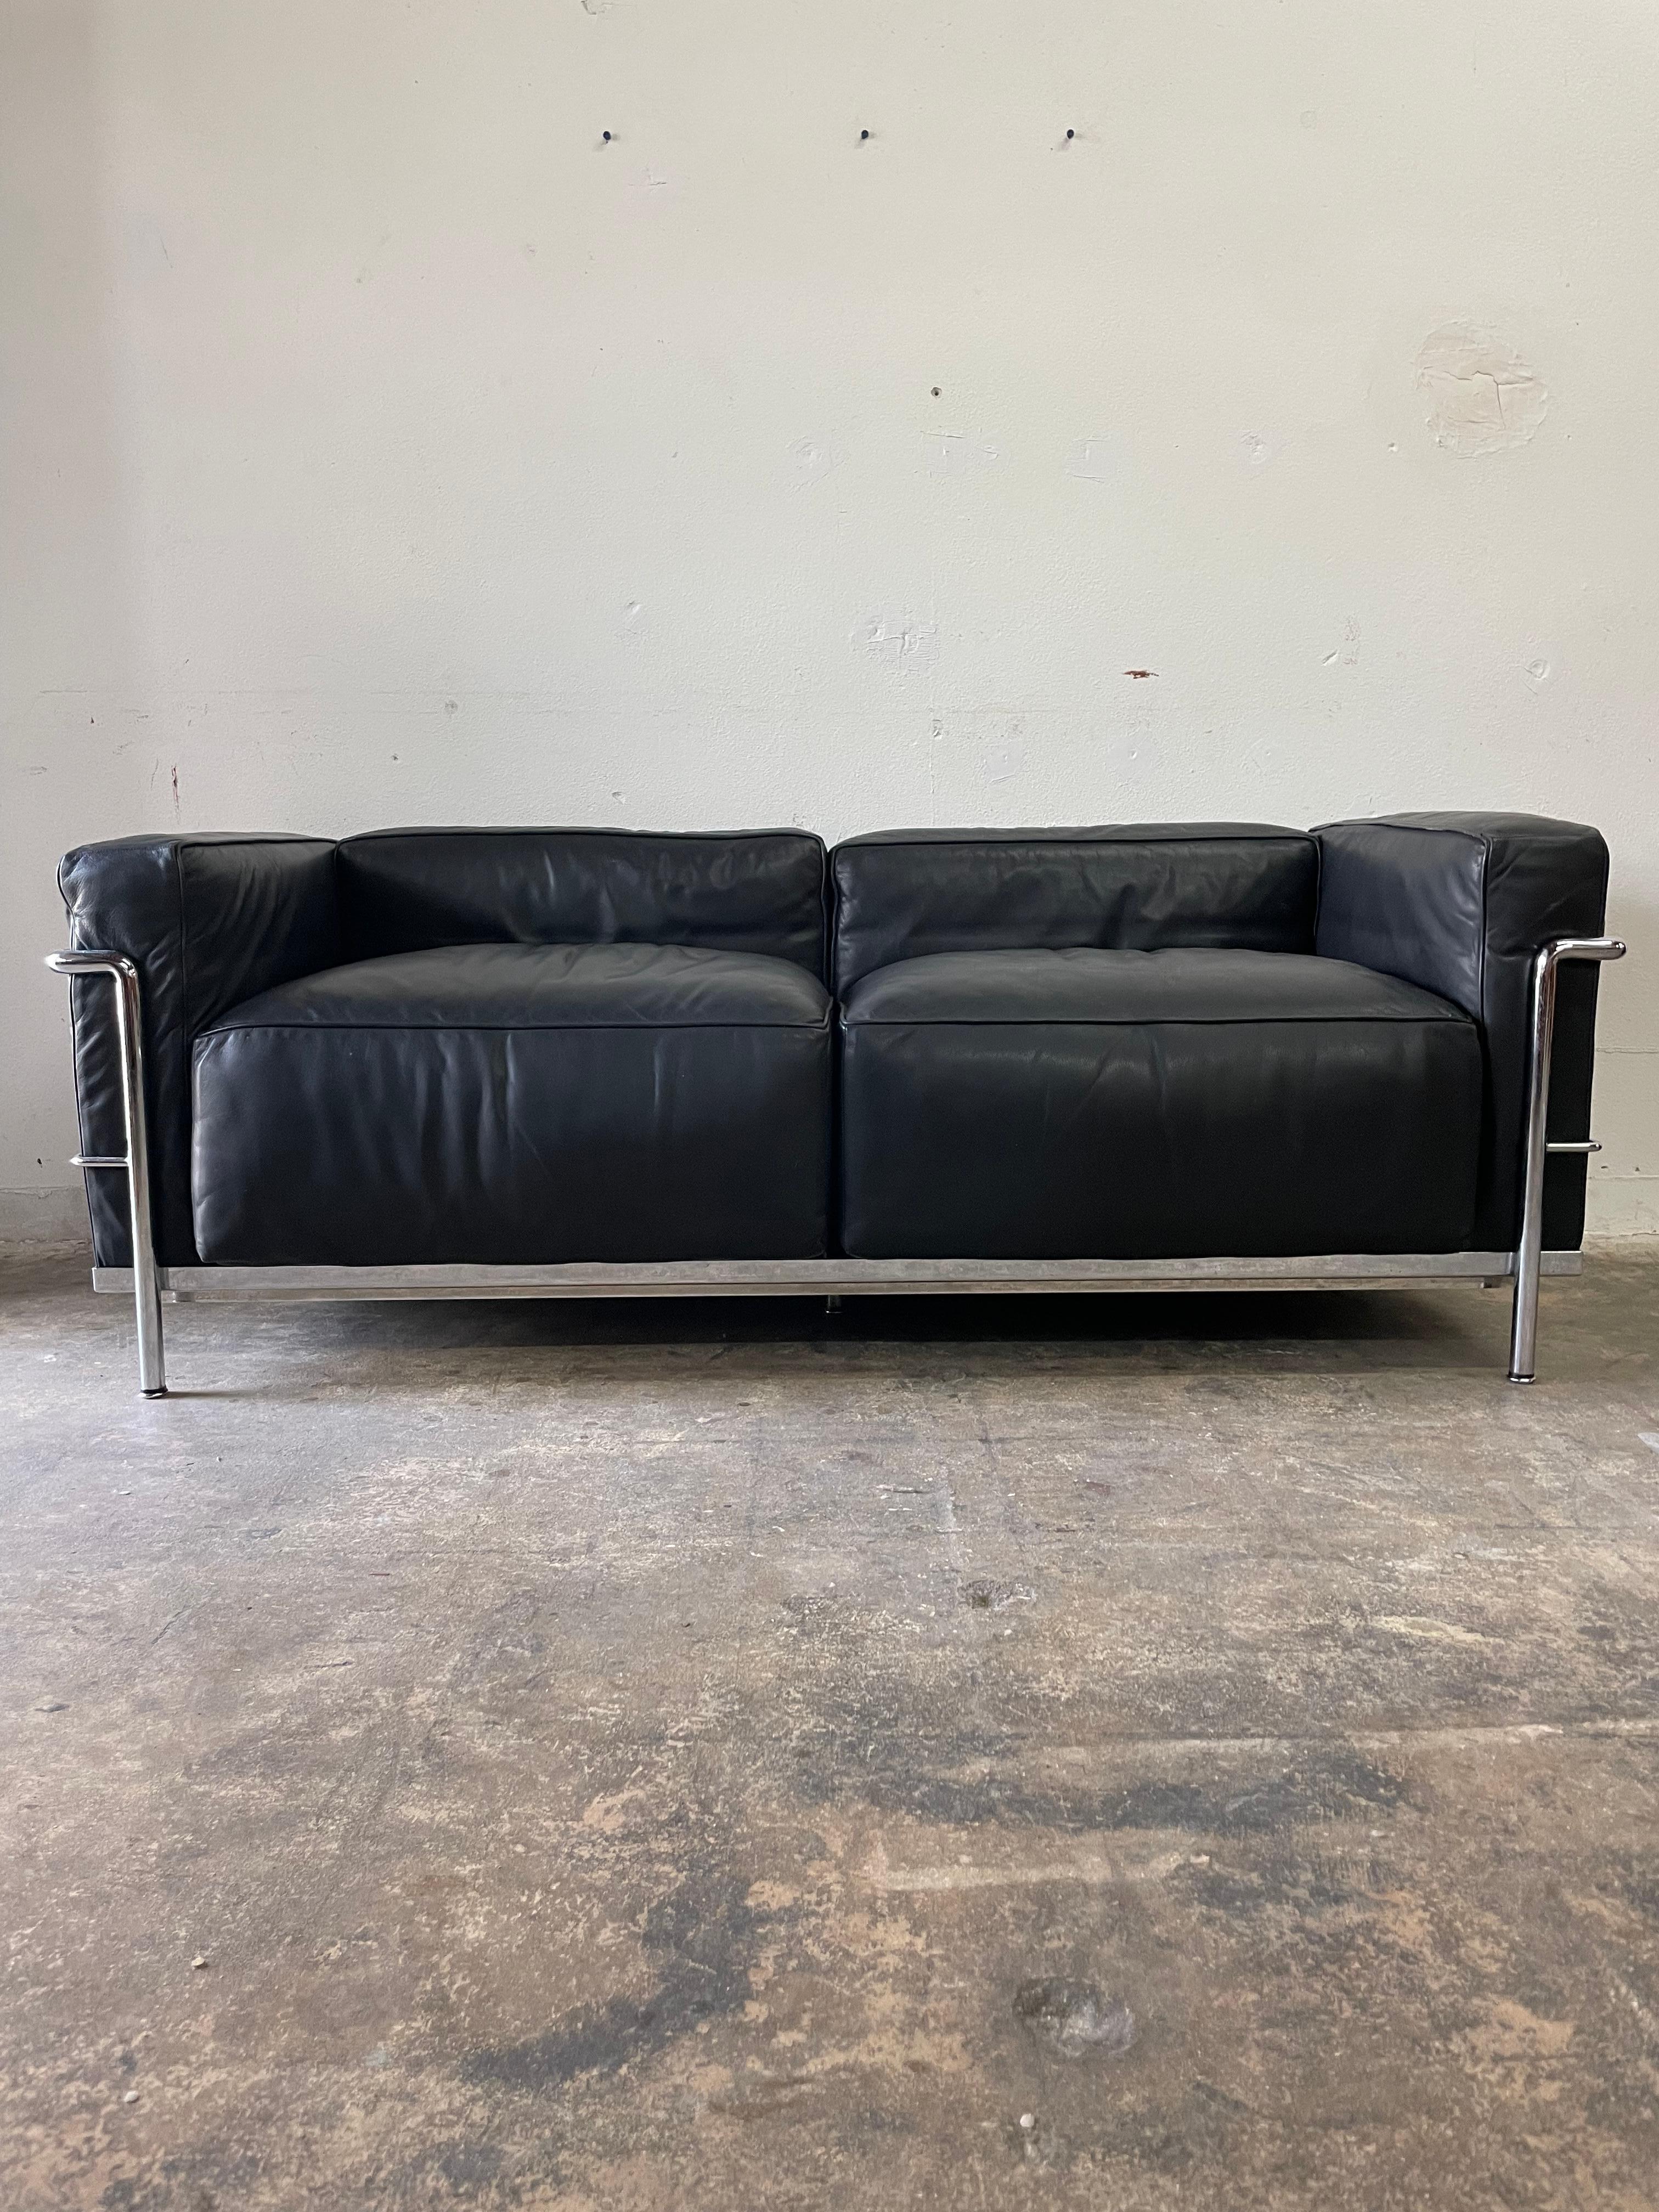 Authentic LC2 sofa in chrome and black leather designed by Le Corbusier and Charlotte Perriand and produced by Cassina.
Black leather. Stamped. Some Patina on leather.